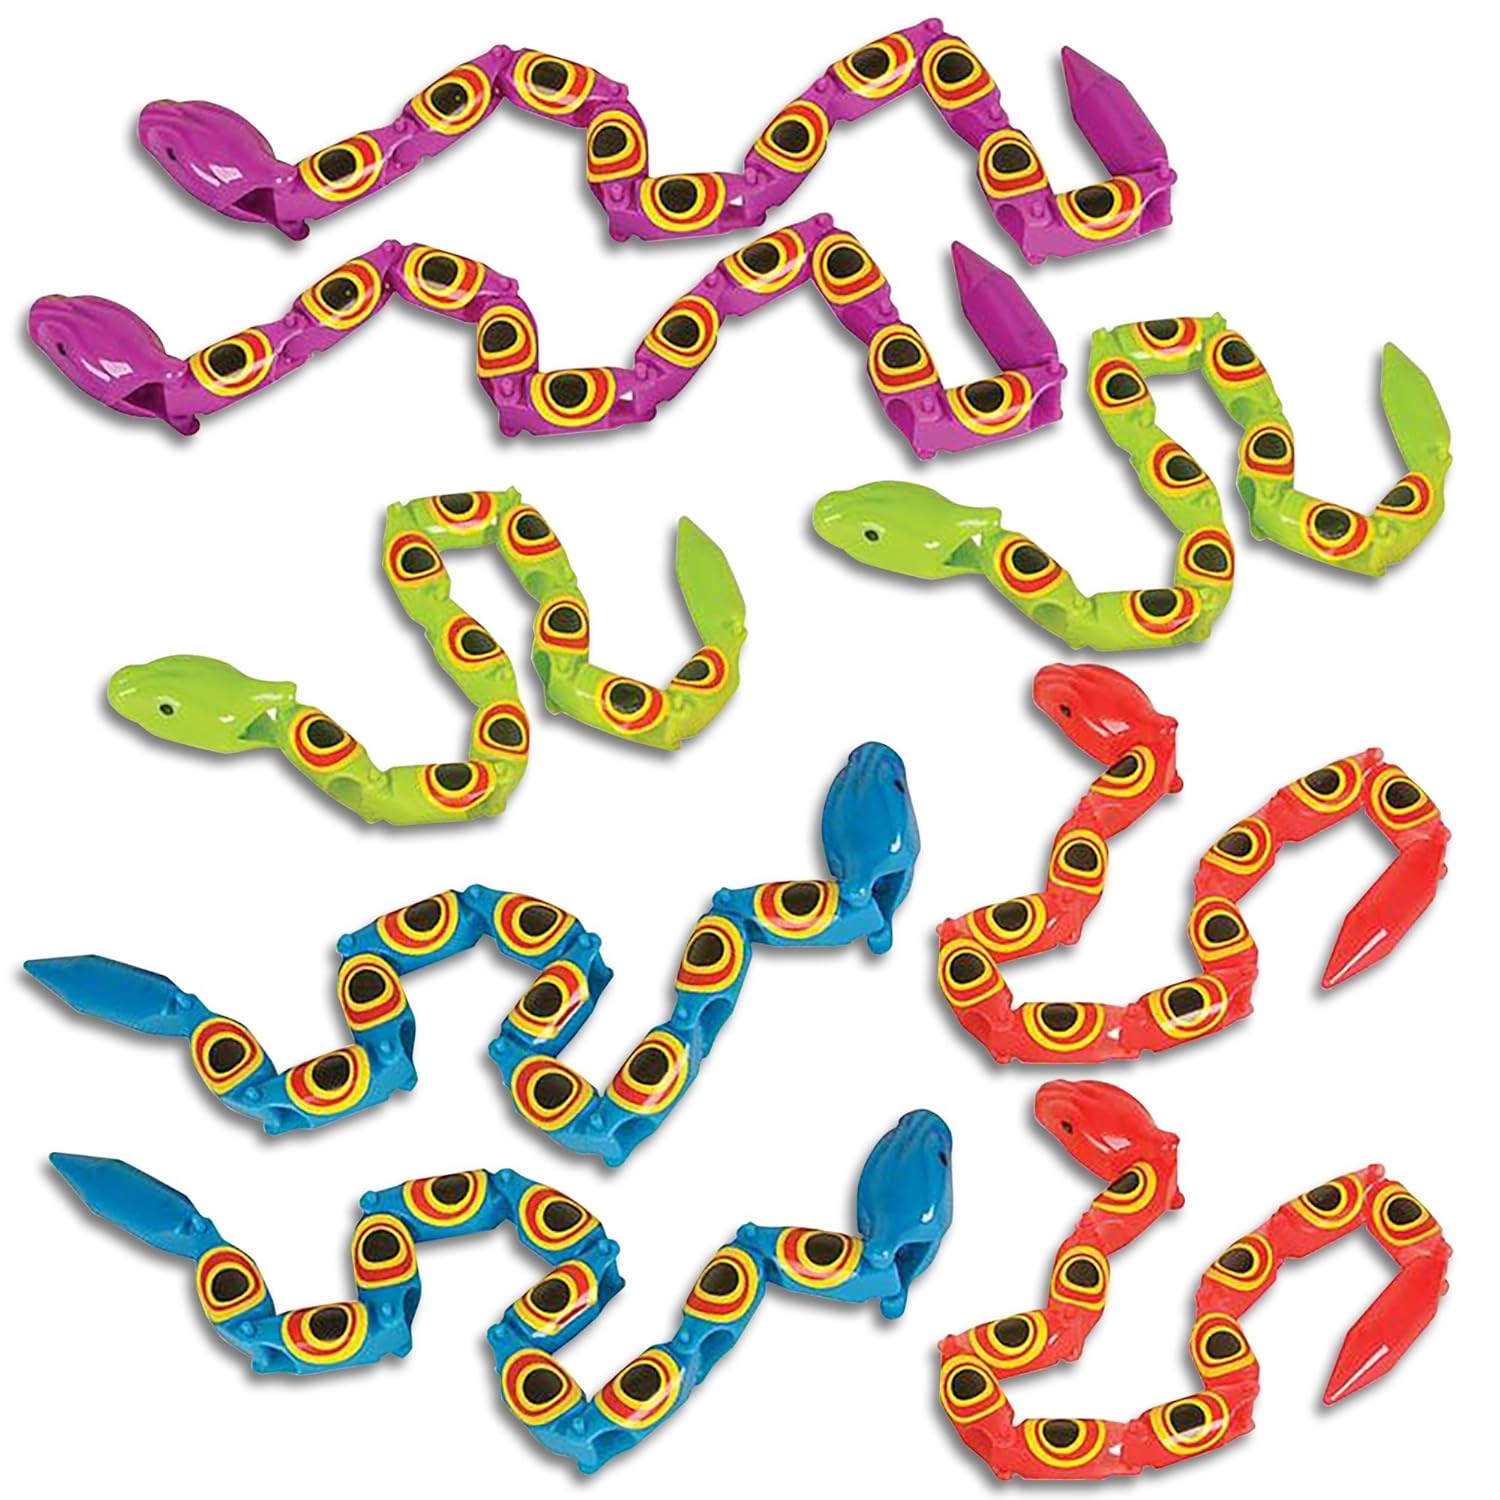 Jointed Snake Toys Set of 12 - 15 Inch